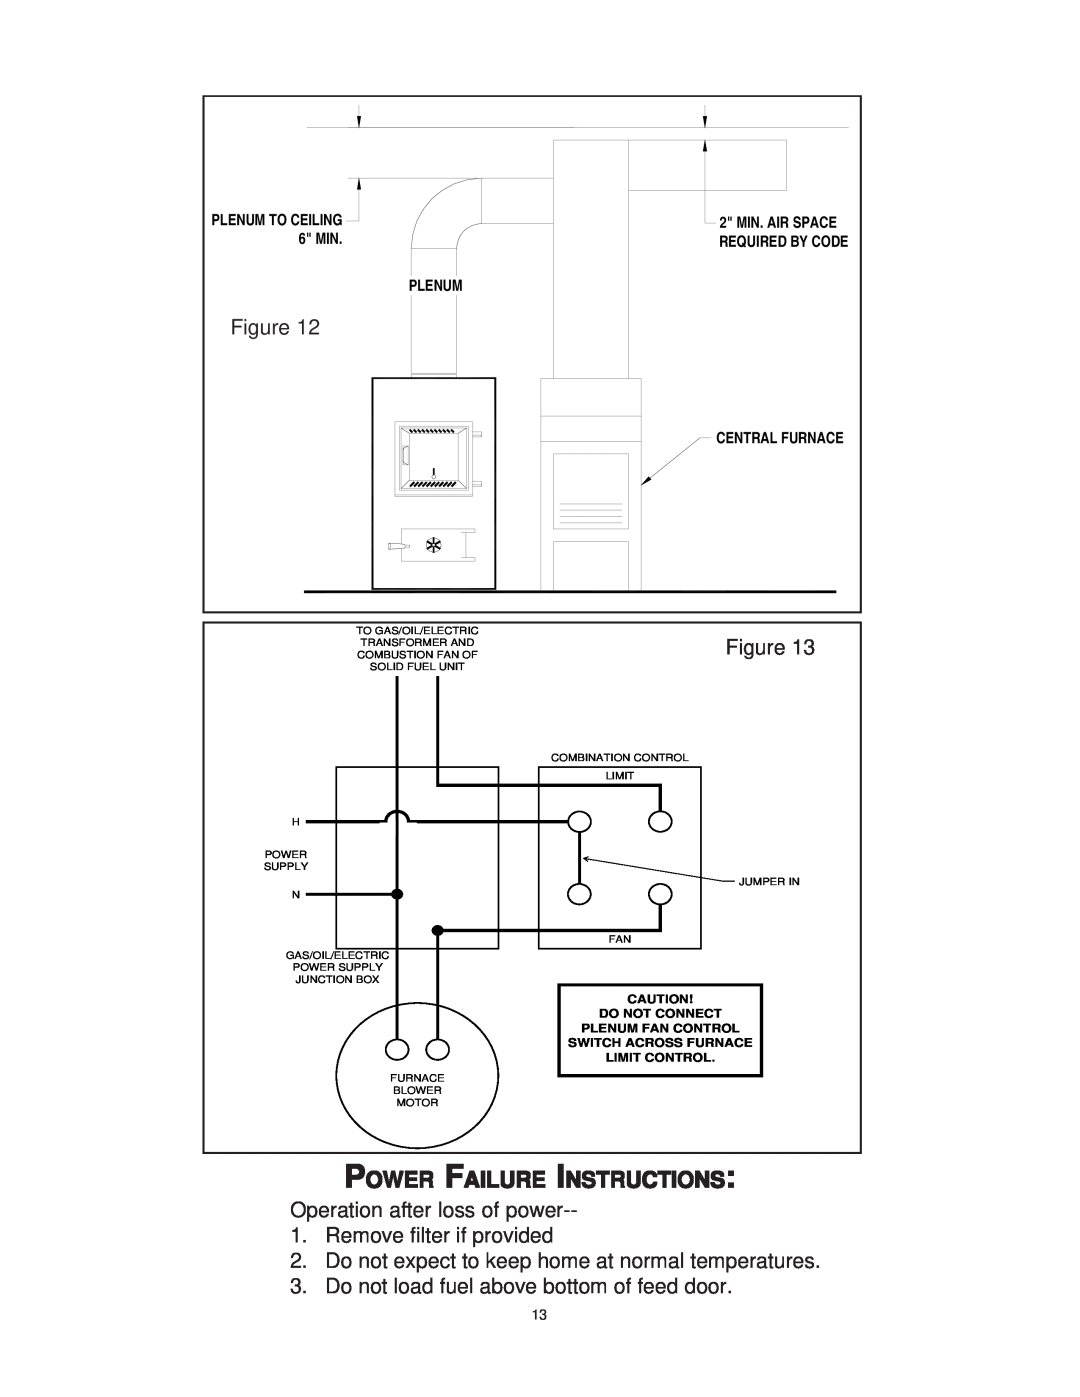 United States Stove 1537M Power Failure Instructions, 6 MIN, Plenum To Ceiling, 2 MIN. AIR SPACE, Central Furnace 